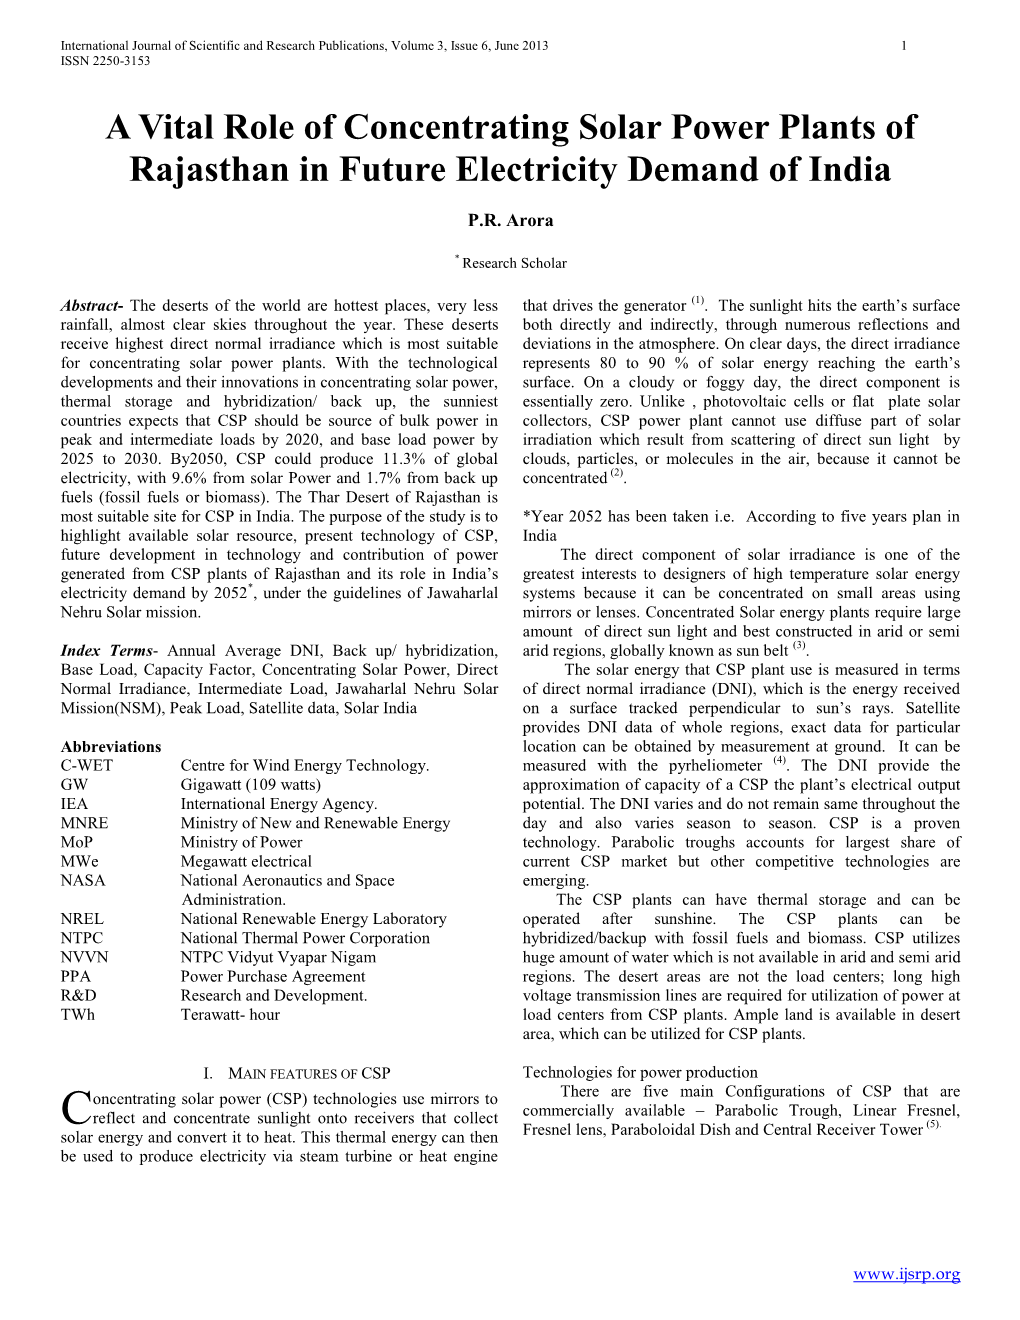 A Vital Role of Concentrating Solar Power Plants of Rajasthan in Future Electricity Demand of India